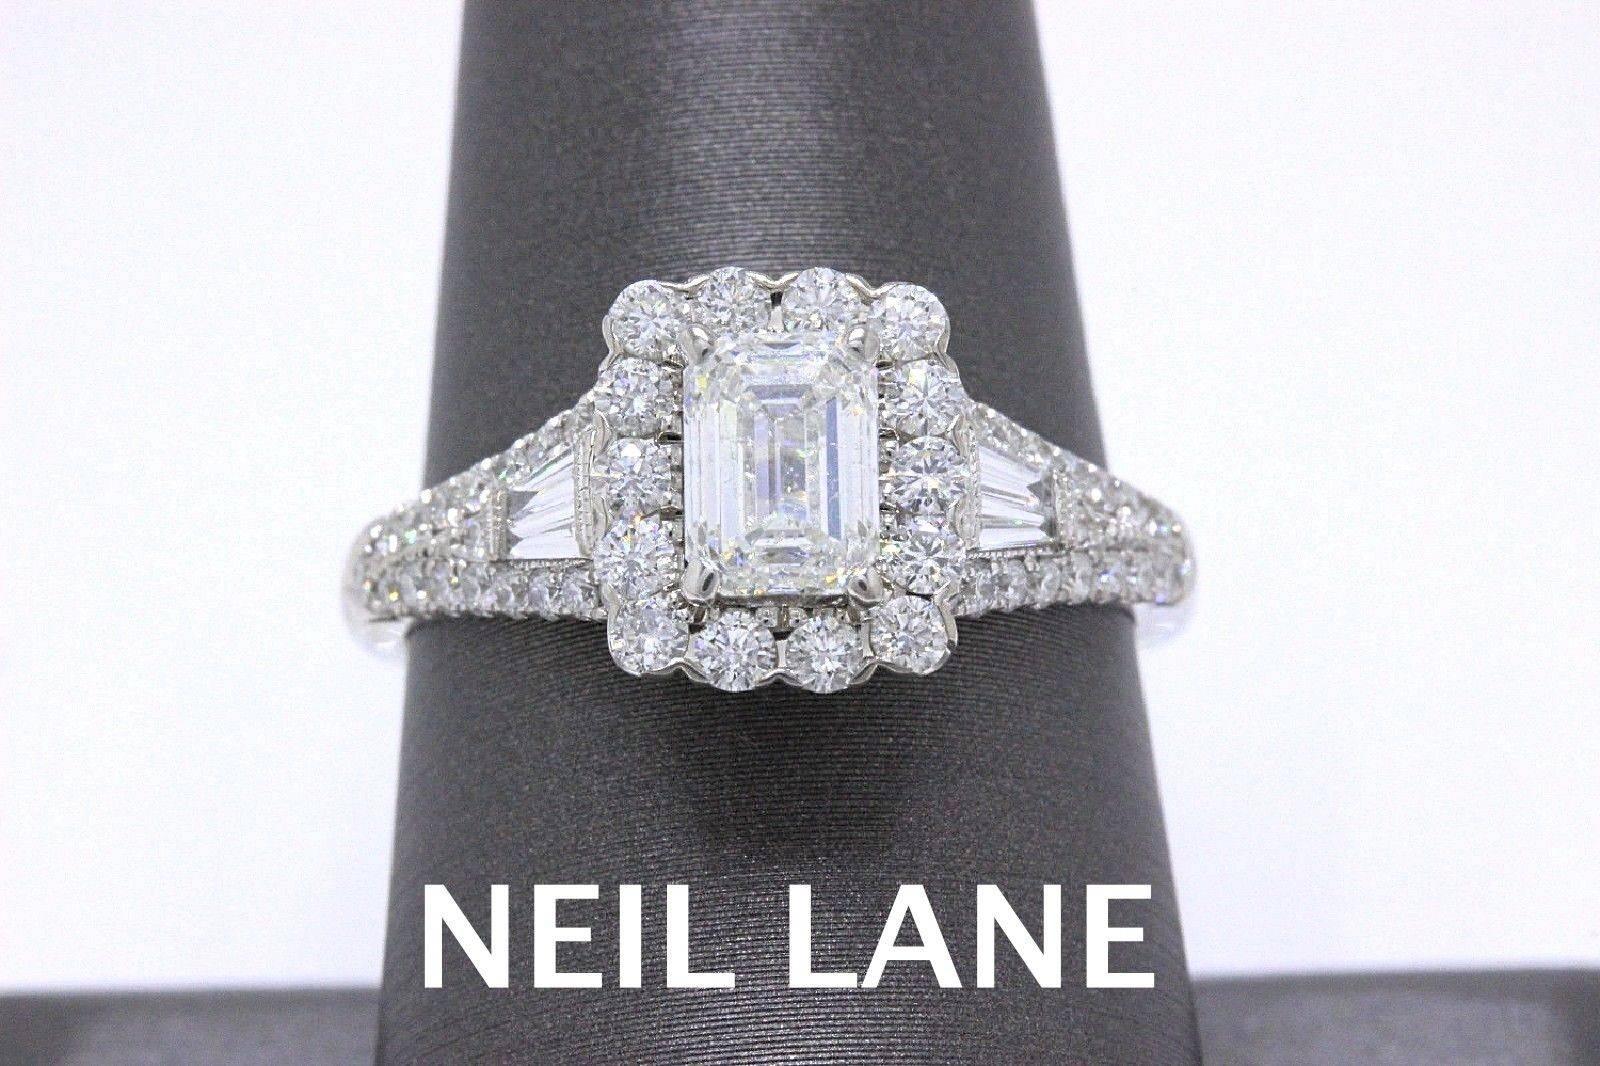 NEIL LANE BRIDAL ENGAGEMENT RING
Style:  Emerald Diamond 1 7/8 TCW 
Stock Number:  940290719
Metal:  14KT White Gold
Size:  7 - Sizable 
Total Carat Weight:  1 7/8 TCW / 1.875 TCW
Diamond Shape:  Emerald Cut Diamond 1.00 CTS 
Diamond Color &